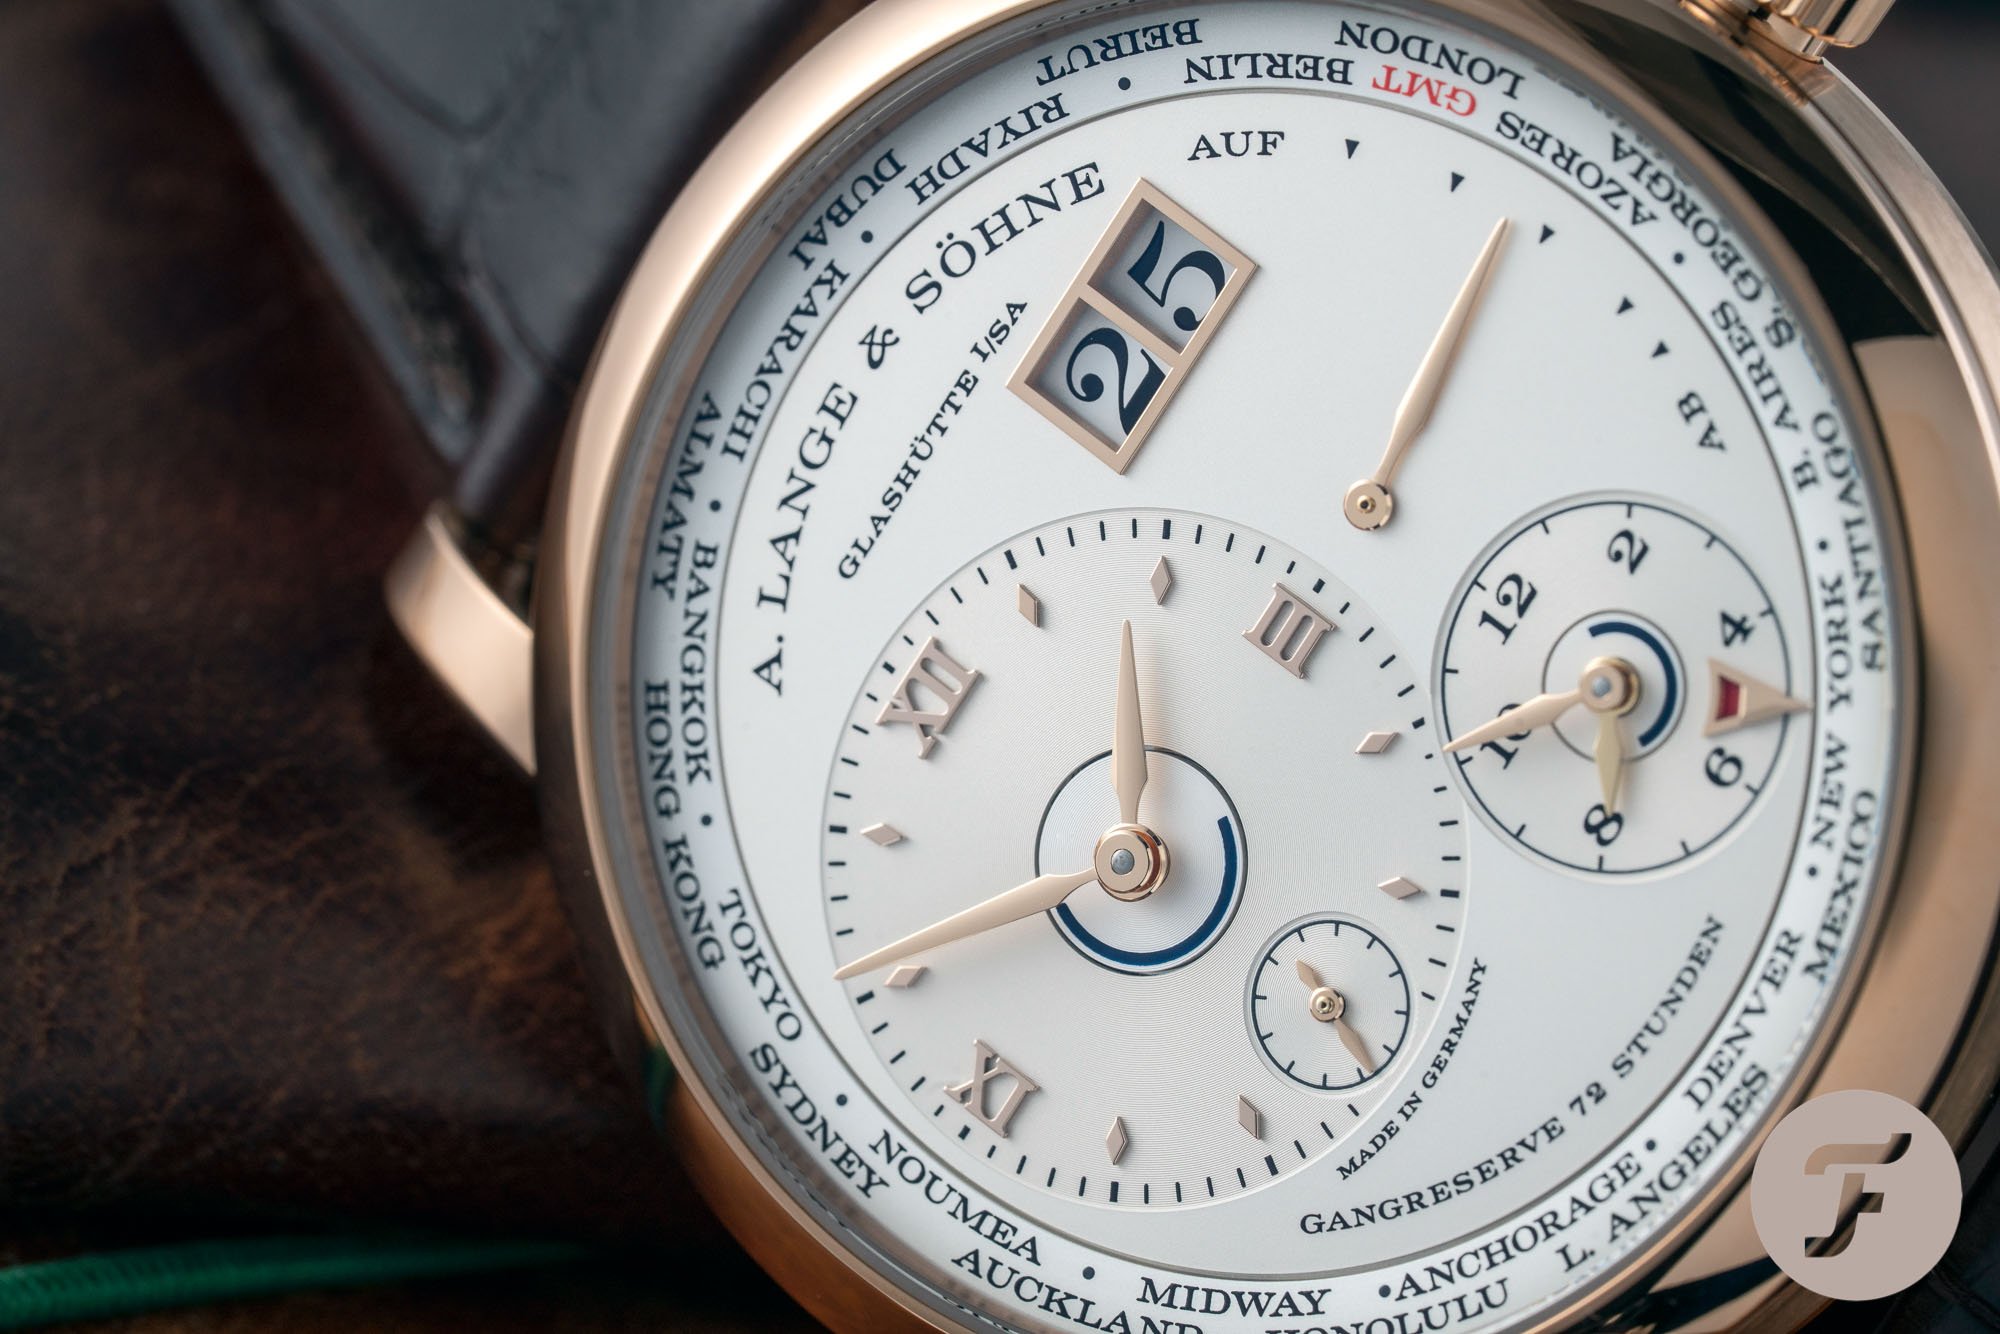 Hands-On With The A. Lange & Söhne Lange 1 Time Zone Watch